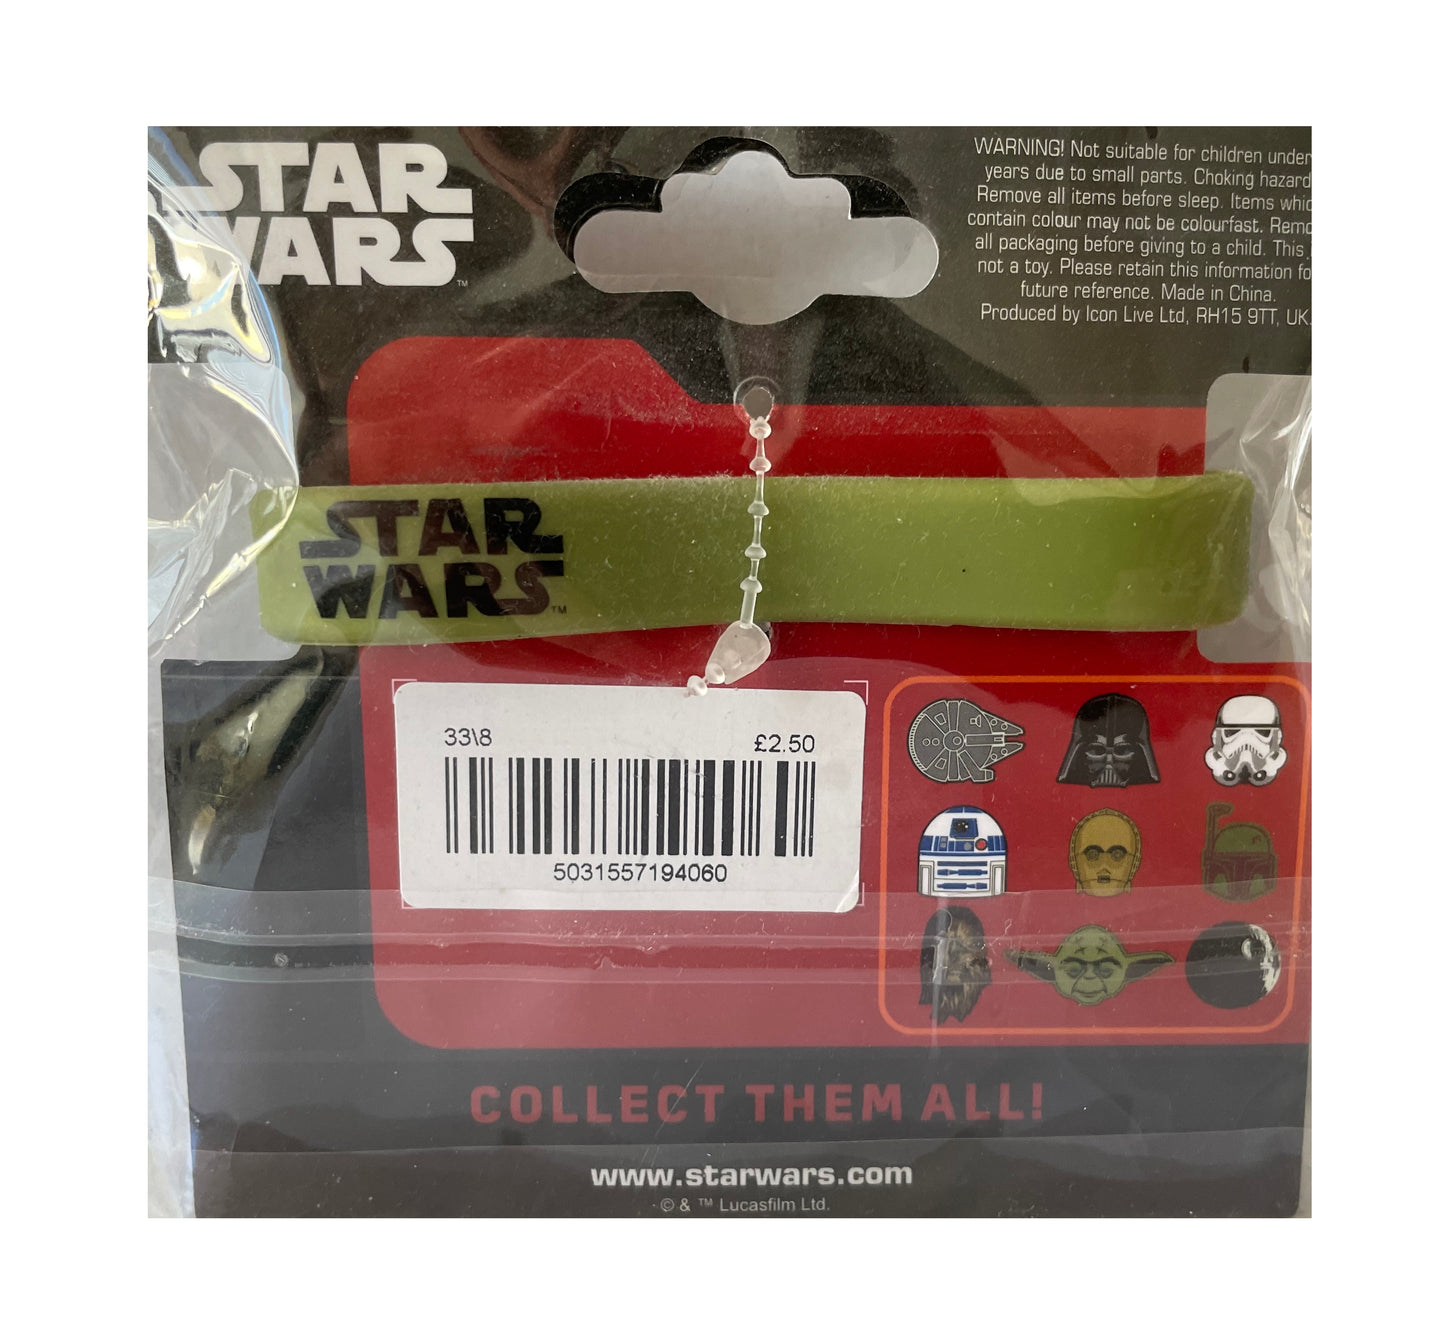 Disney Star Wars Green Rubber Wristband With Jedi Master Yoda 3D Clip On Head - Factory Sealed Shop Stock Room Find